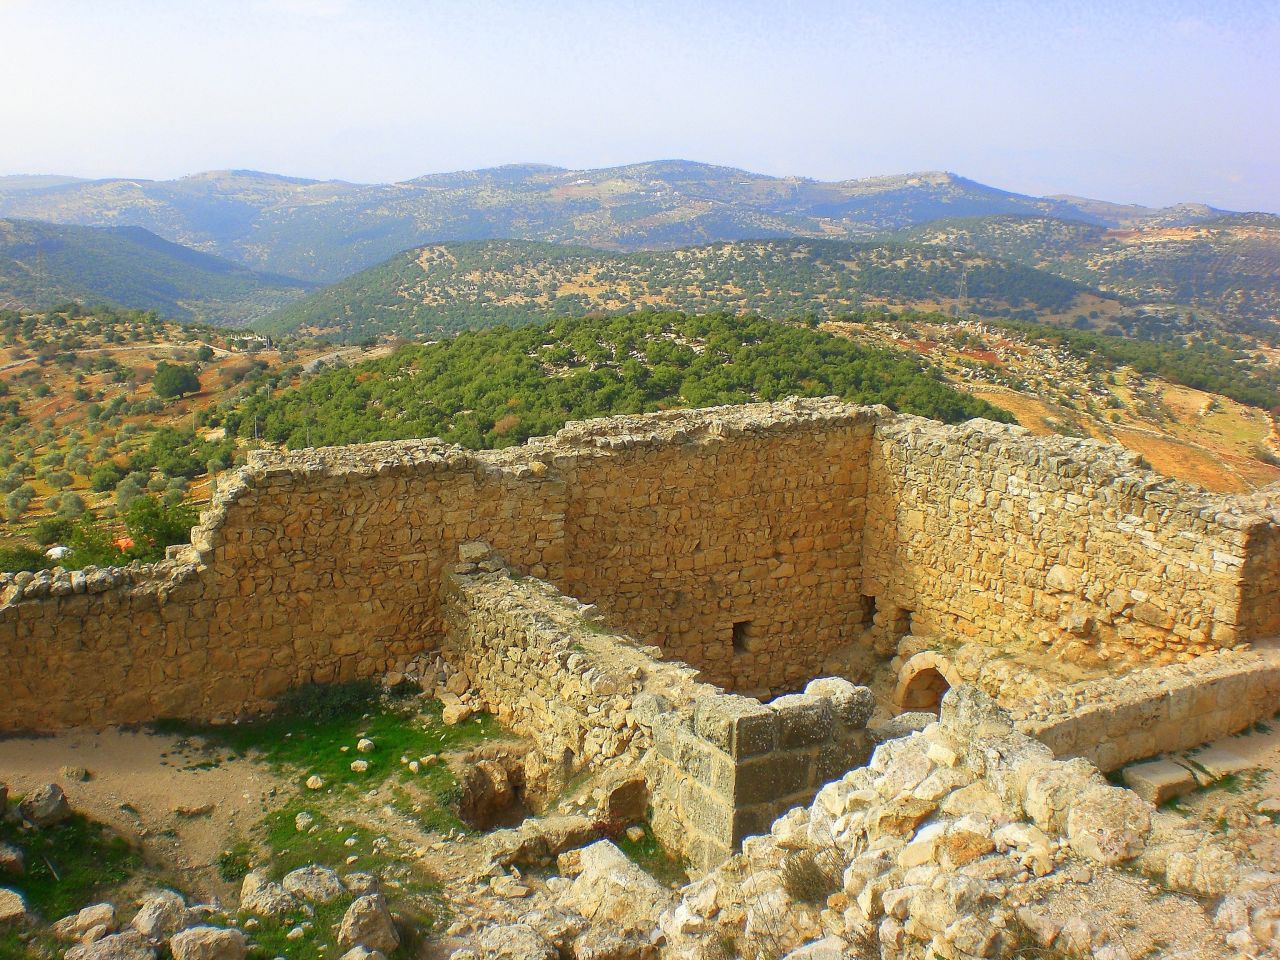 The Ajloun region has a five-day hiking trail that's part of the multi-country Abraham Path.